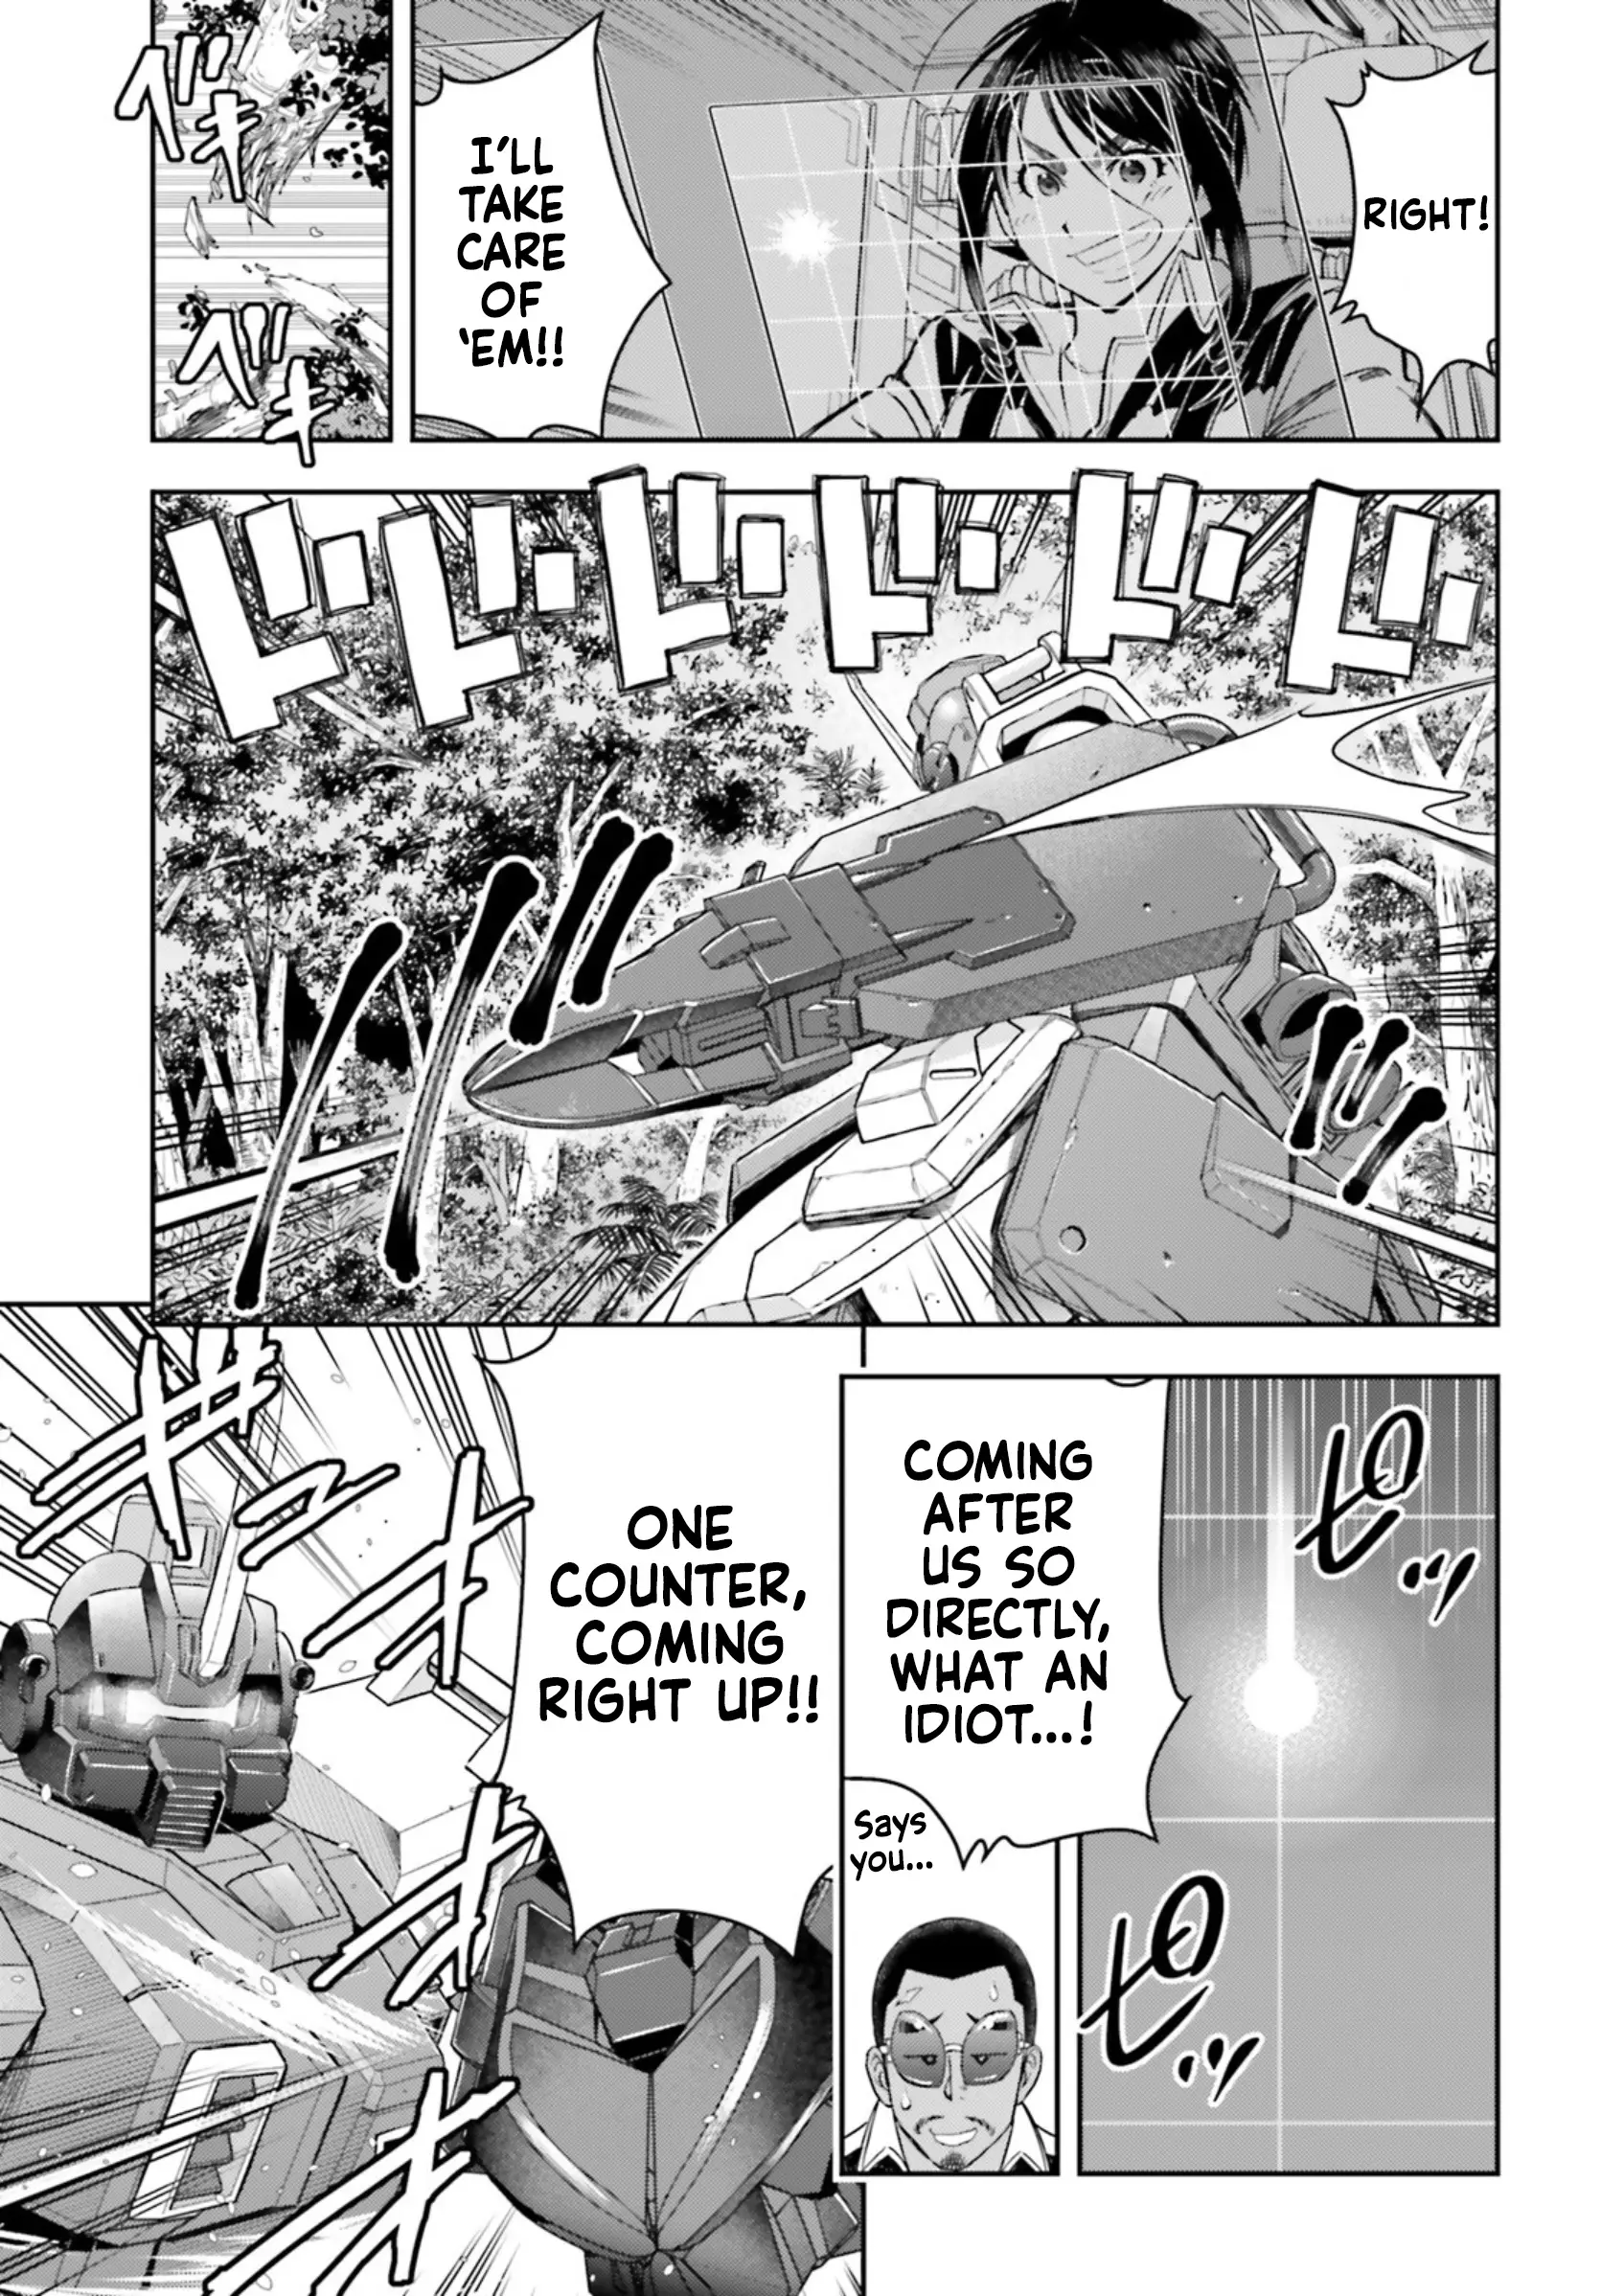 Mobile Suit Gundam: Red Giant 03Rd Ms Team - 8 page 31-3224ef23